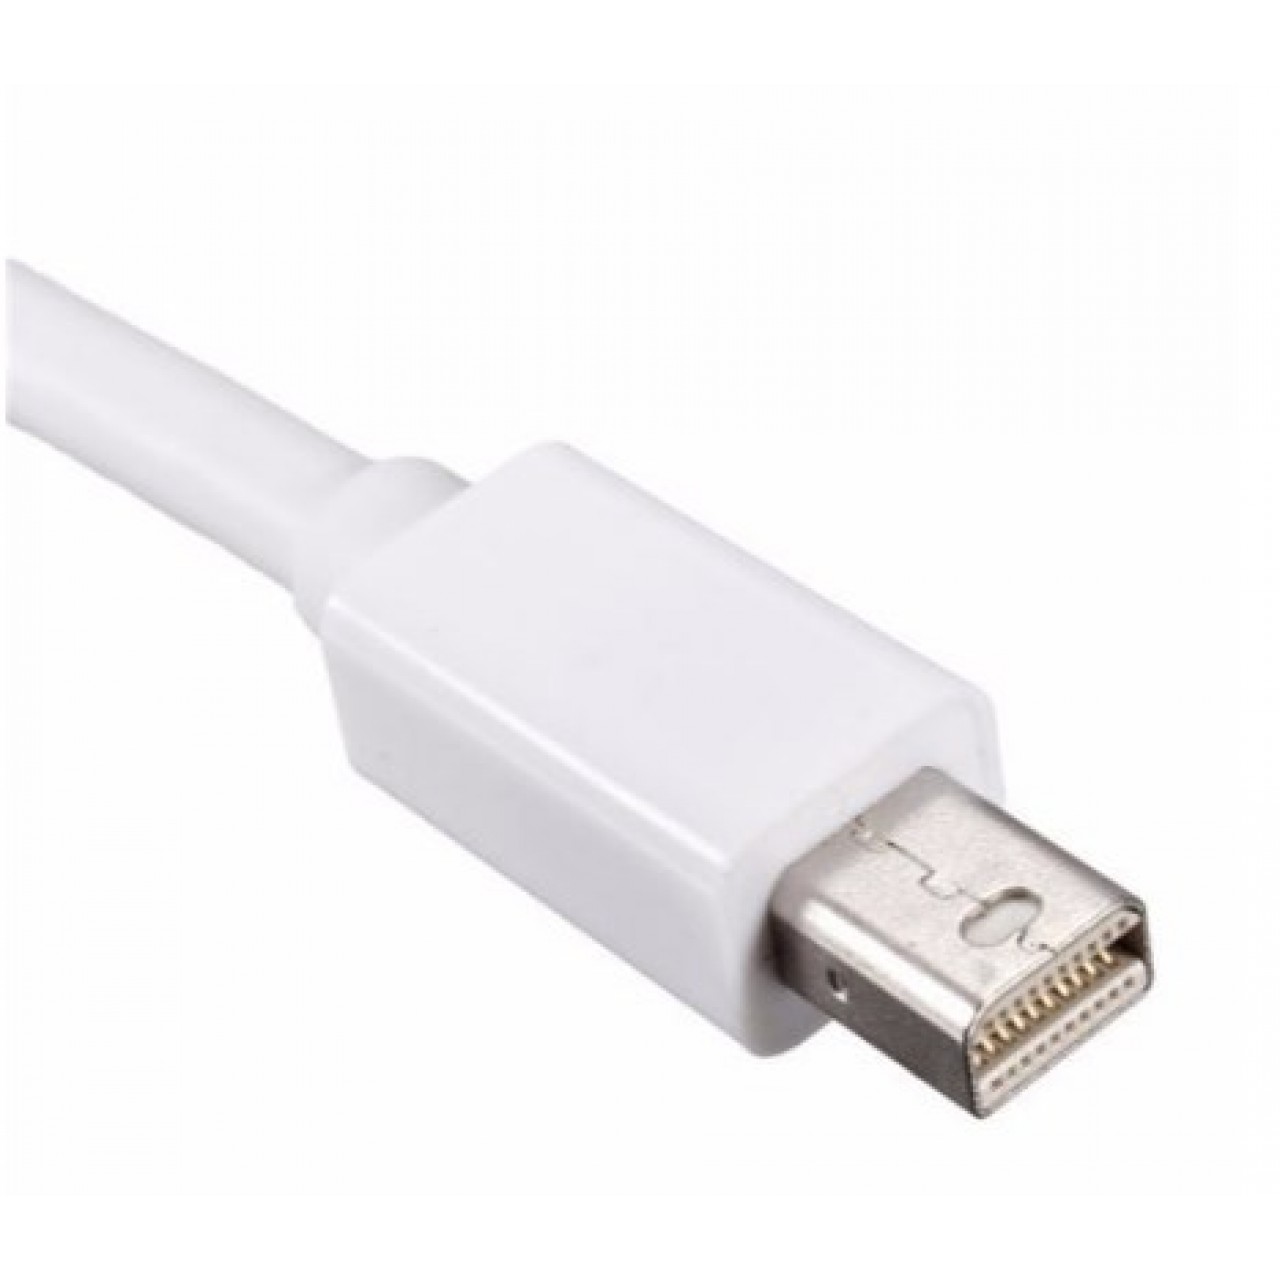 Thunderbolt 2 Mini Display Port DP to HDMI Adapter Cable For Apple Mac Pro Macbook Air - 2519 - OEM